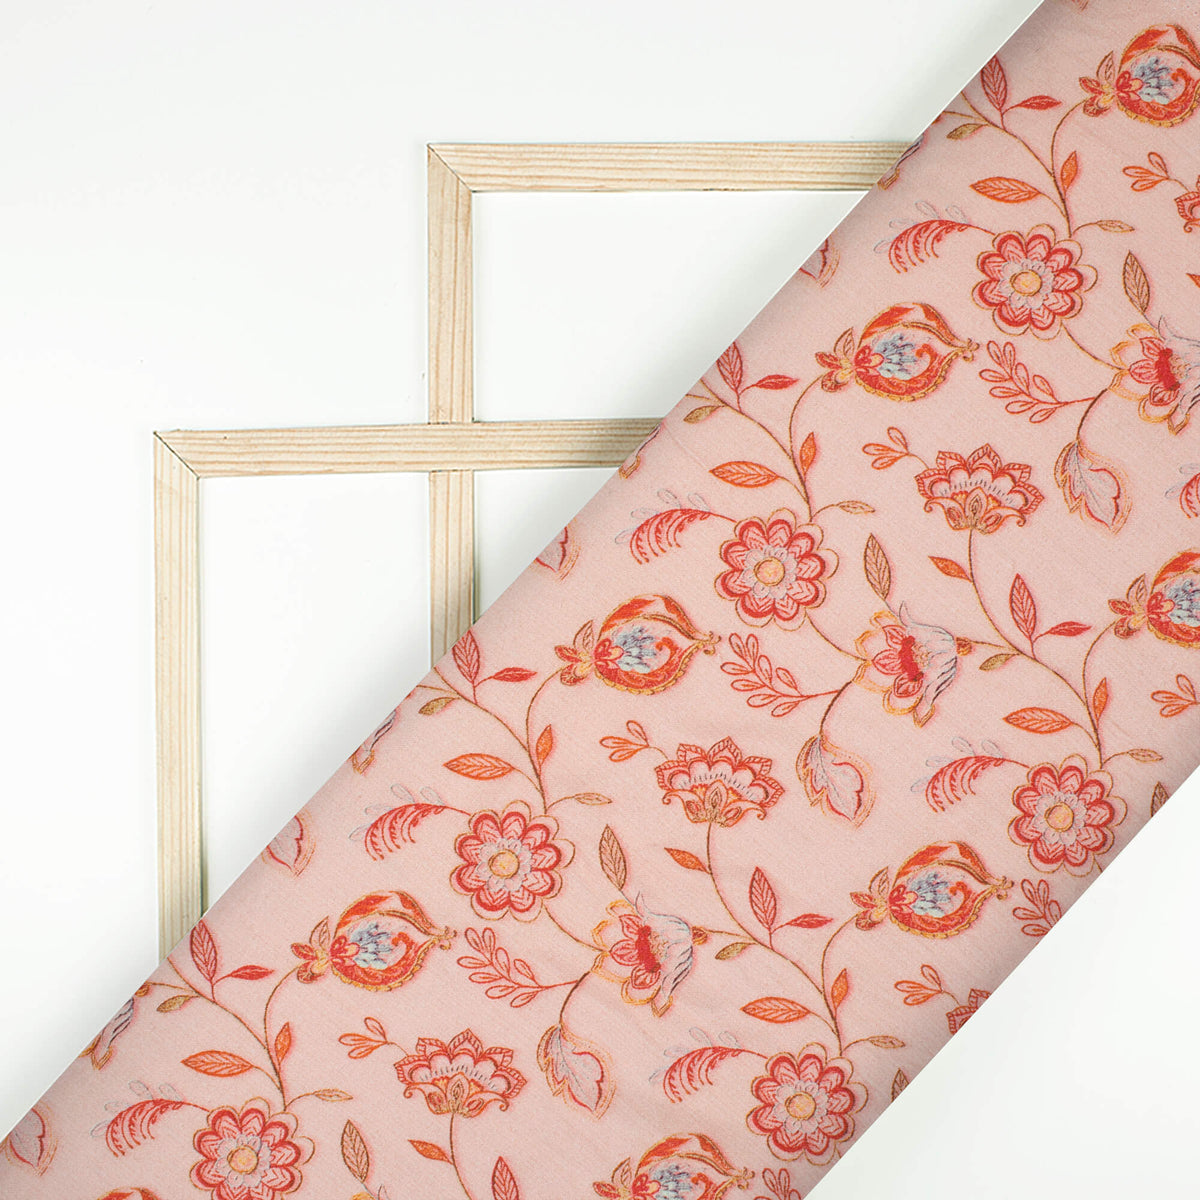 Pastel Peach And Red Floral Pattern Digital Print Viscose Rayon Fabric (Width 58 Inches)